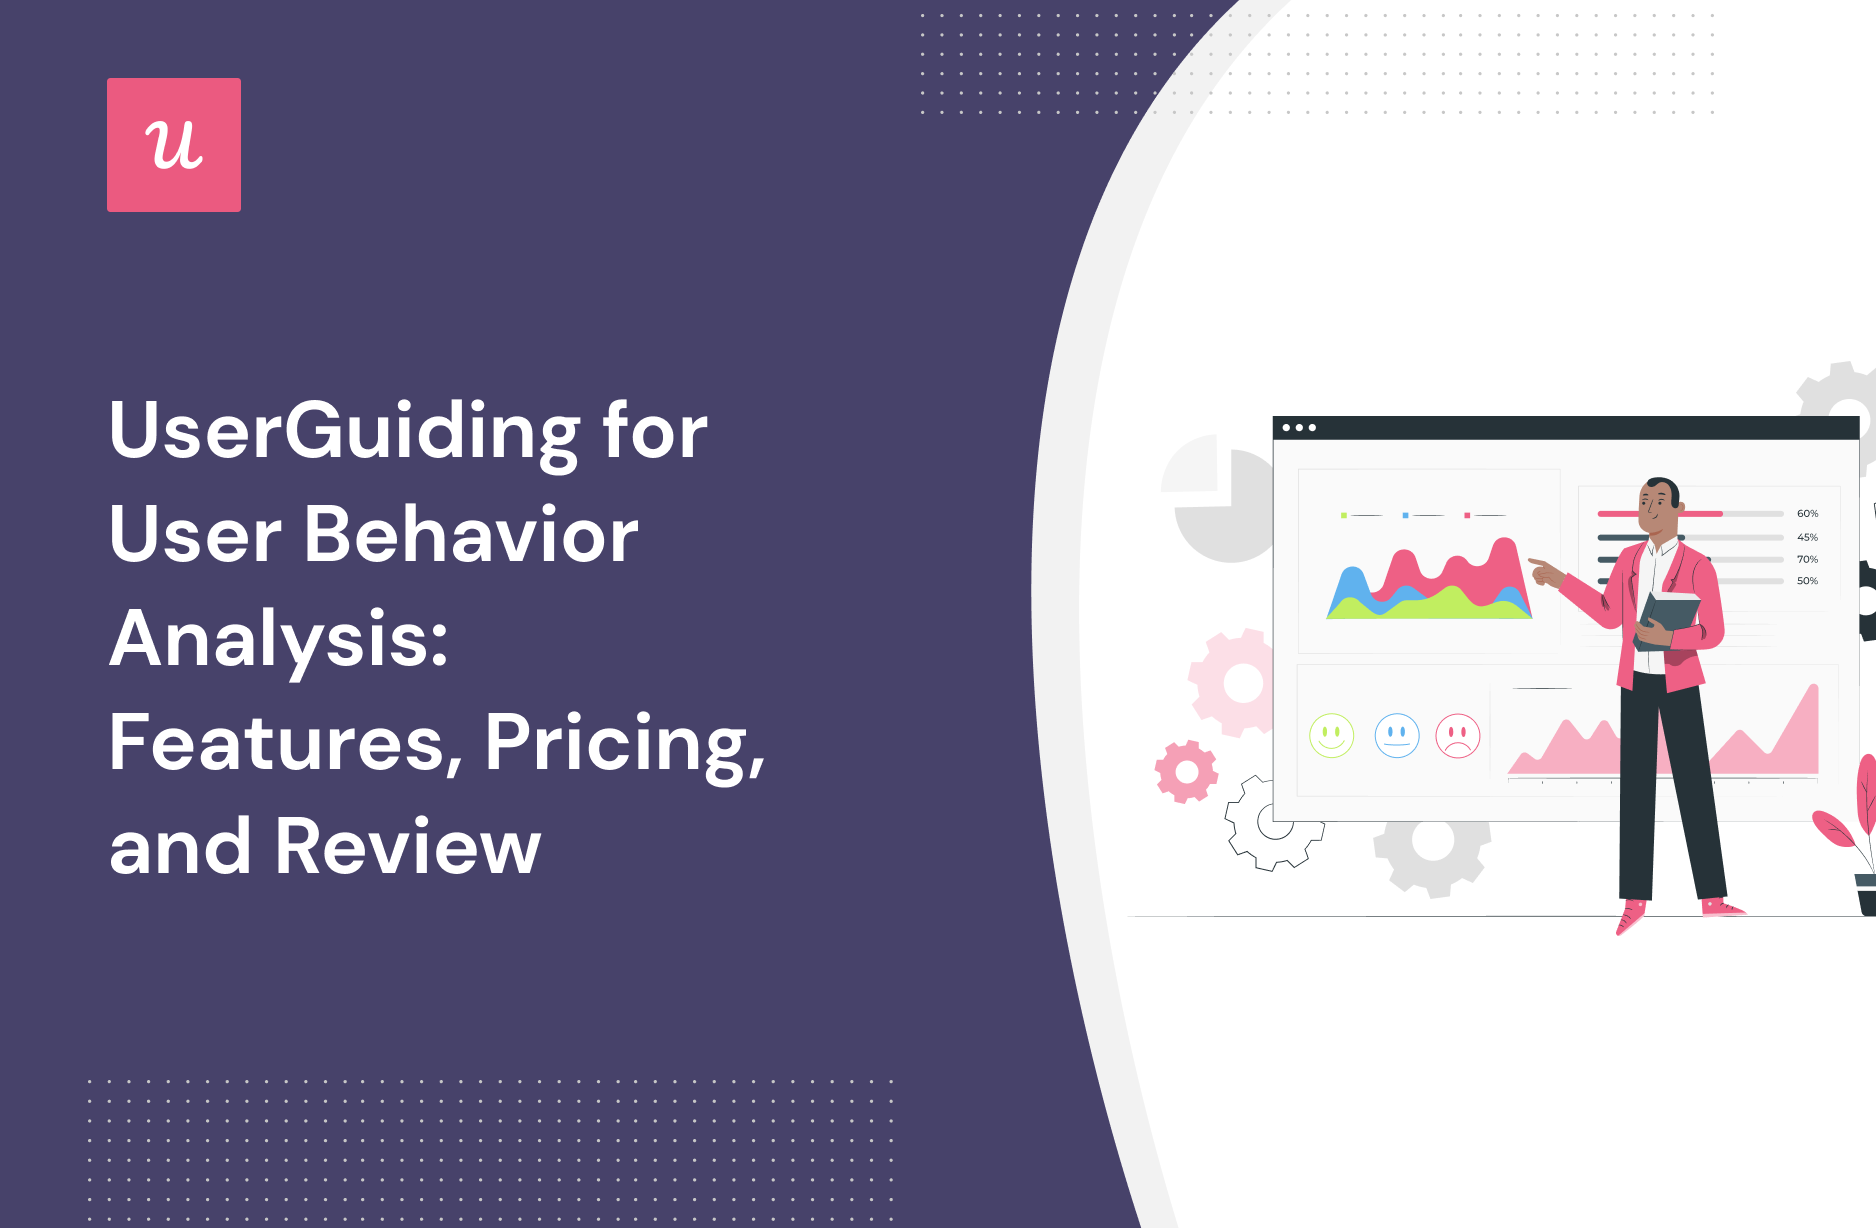 UserGuiding for User behavior analysis: Features, Pricing, and Review